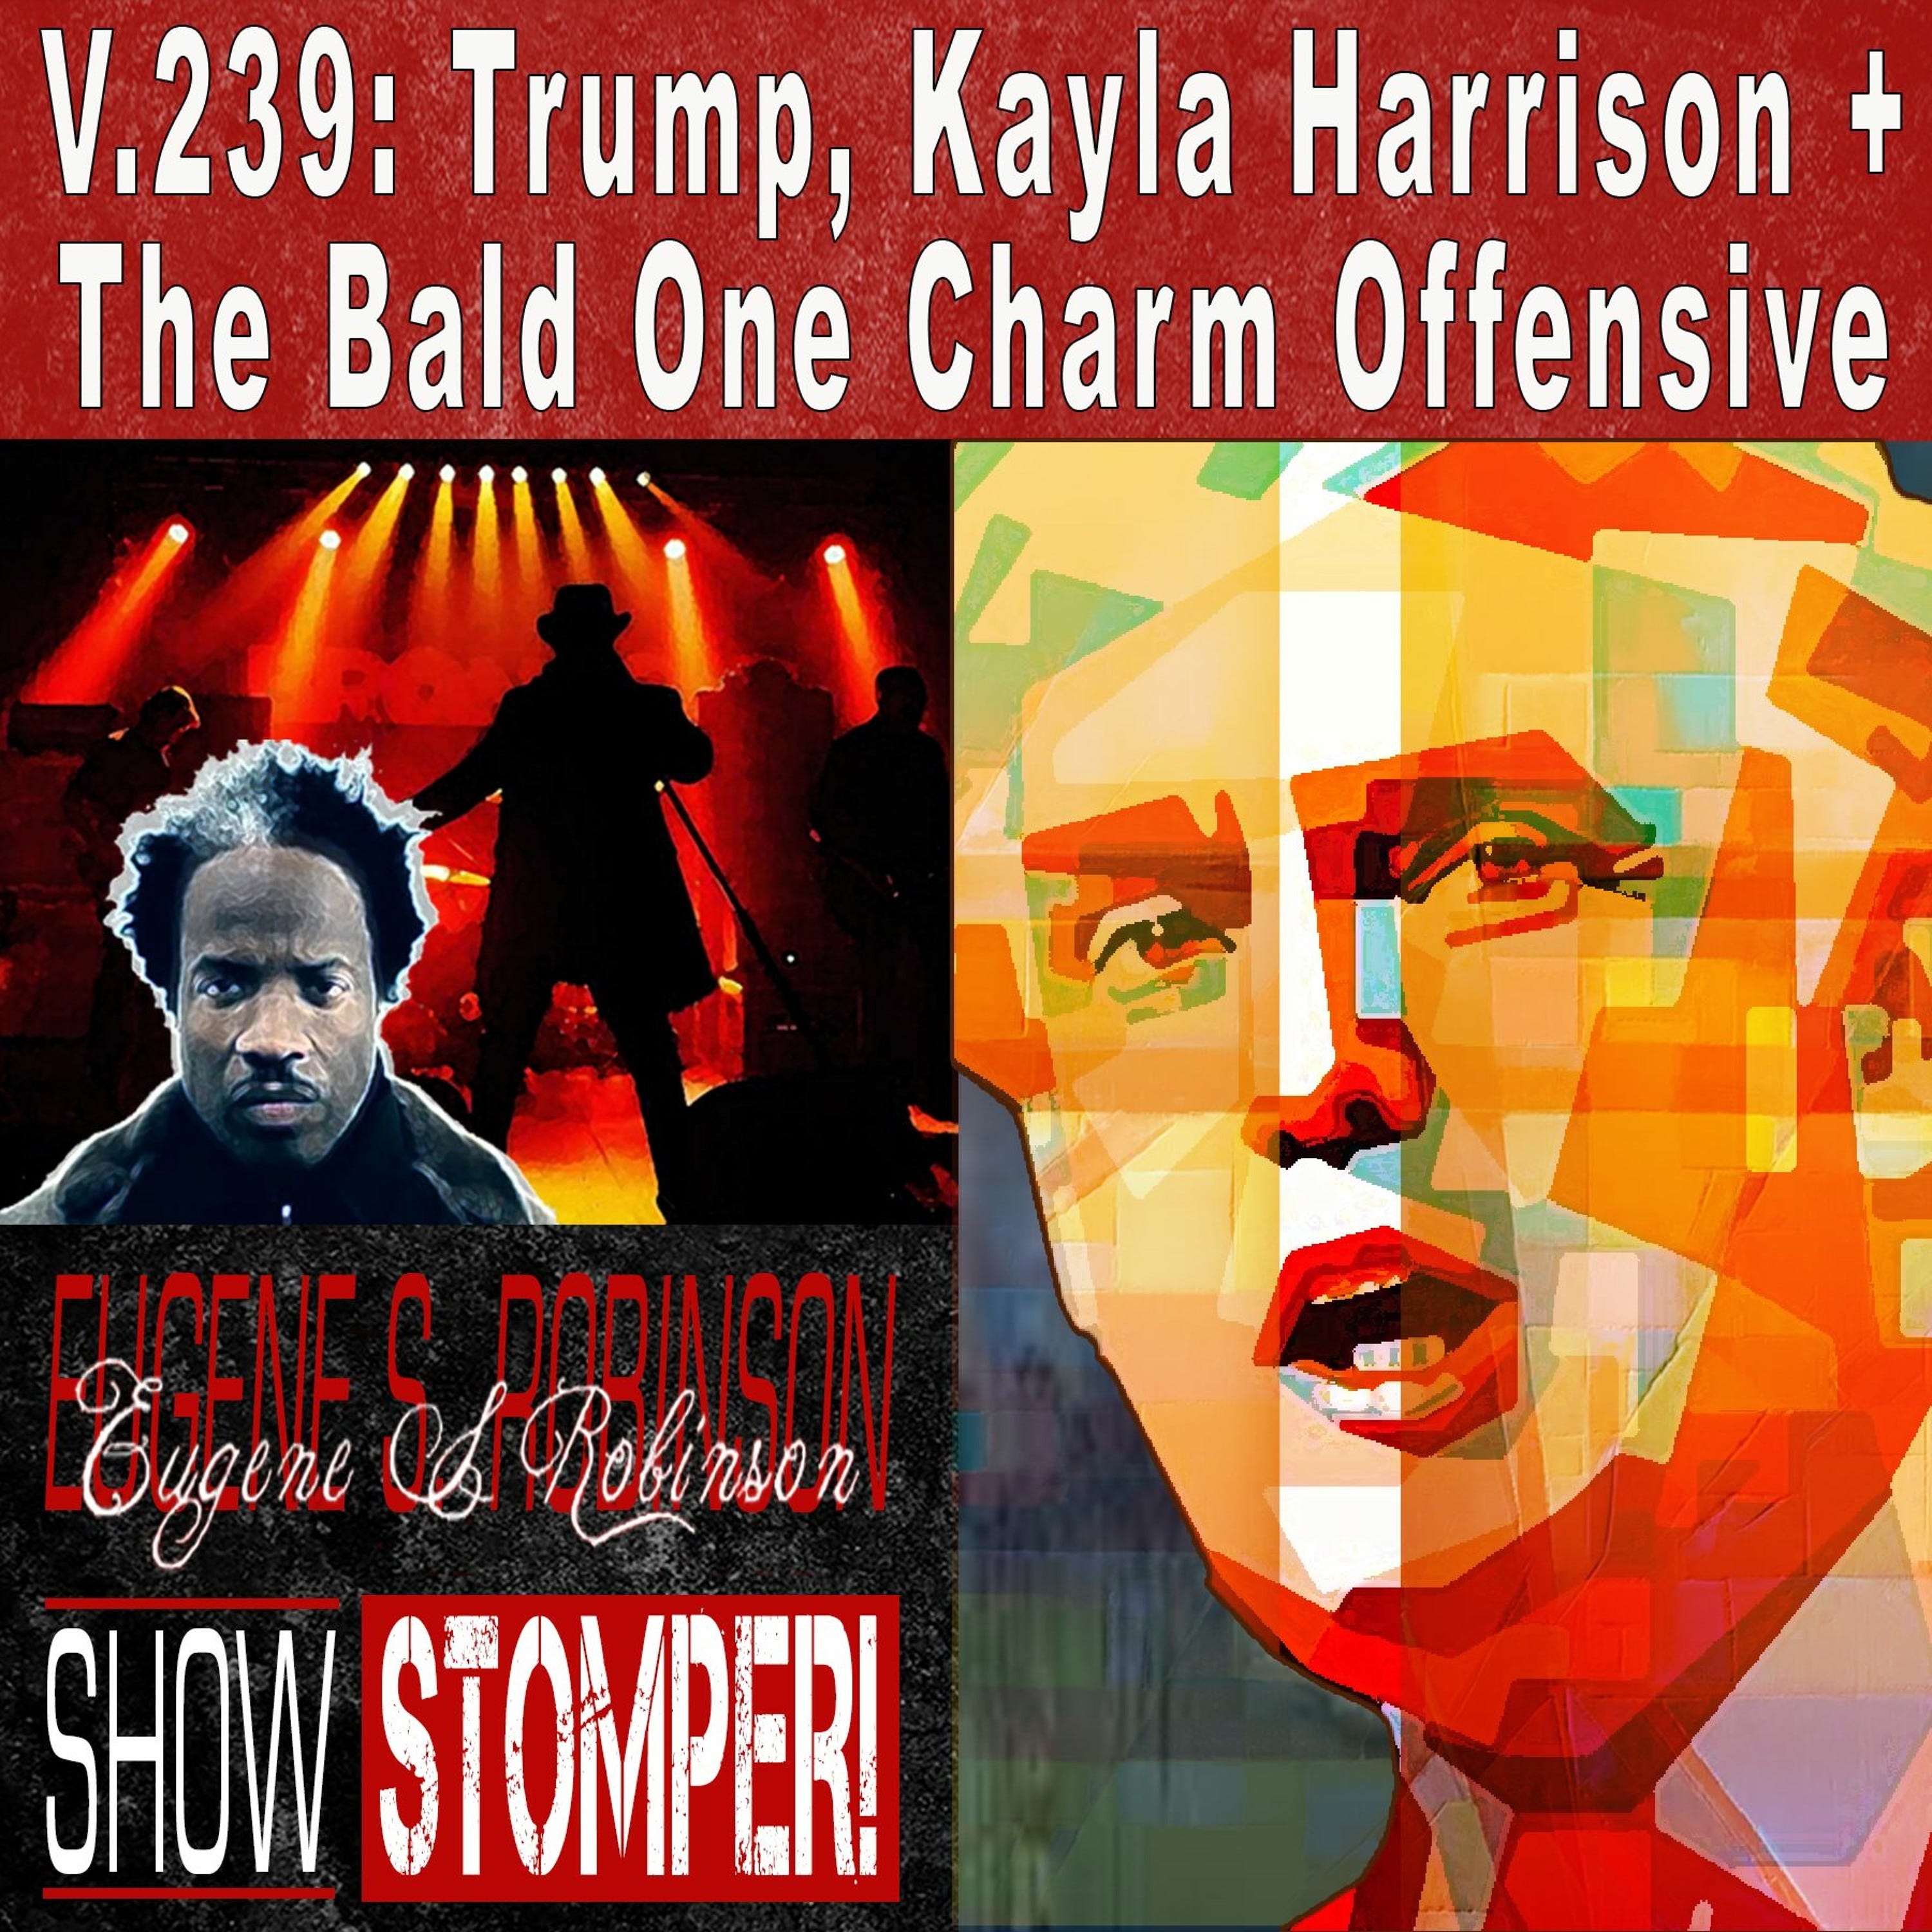 V.239: Trump, Kayla Harrison + The Bald One Charm Offensive On The Eugene S. Robinson Show Stomper!